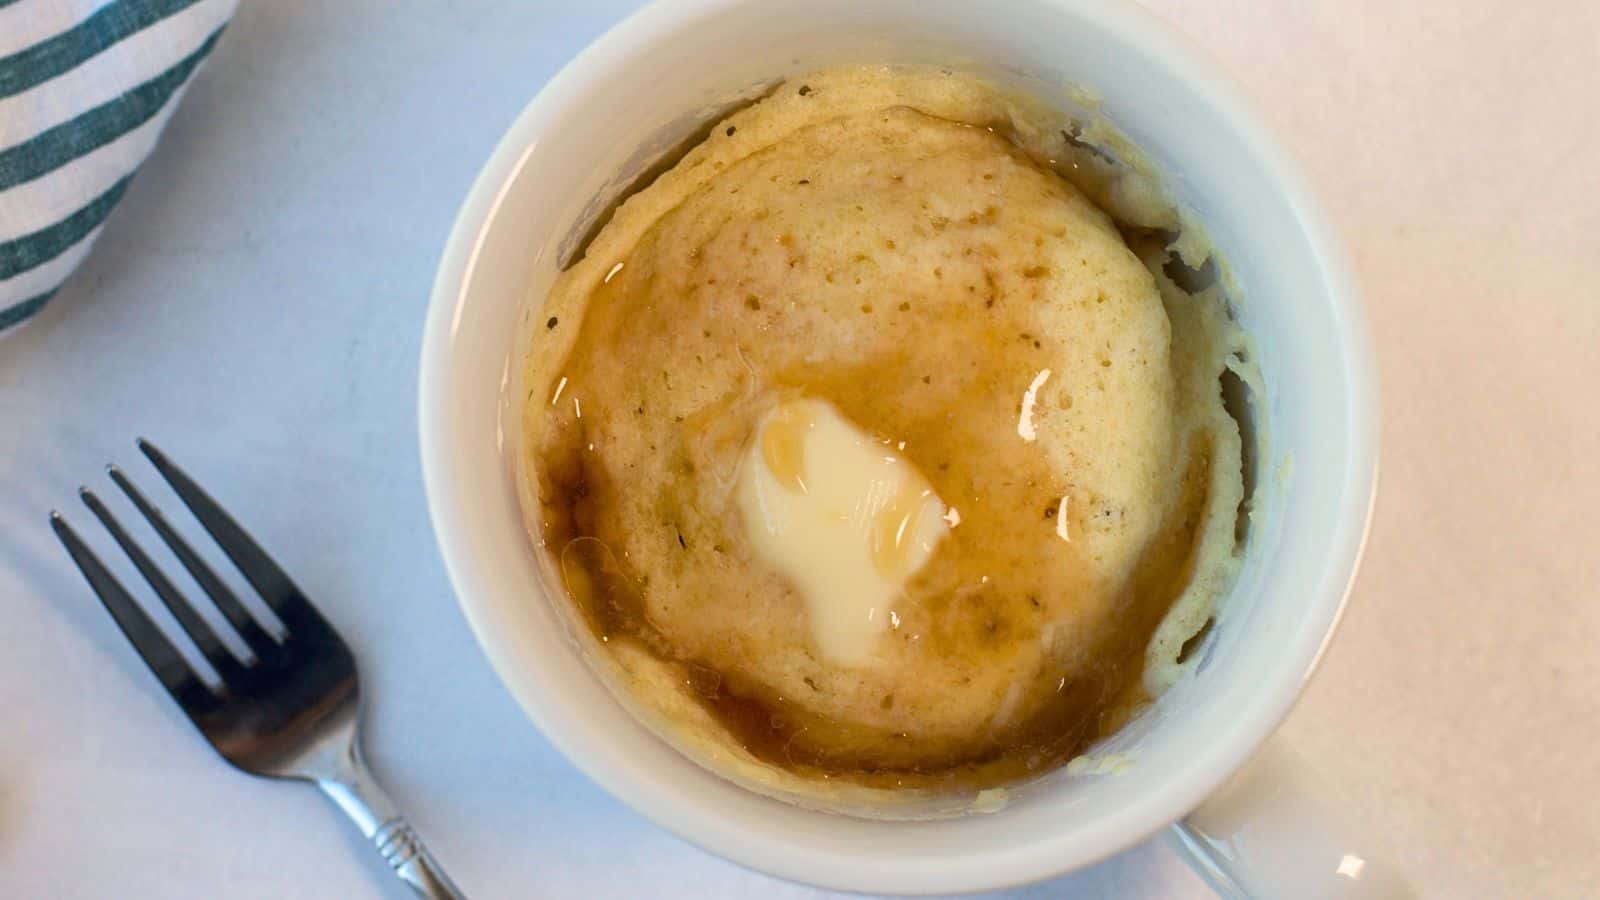 A pancake mug cake with syrup on top, viewed from above, next to a fork on a marble surface.